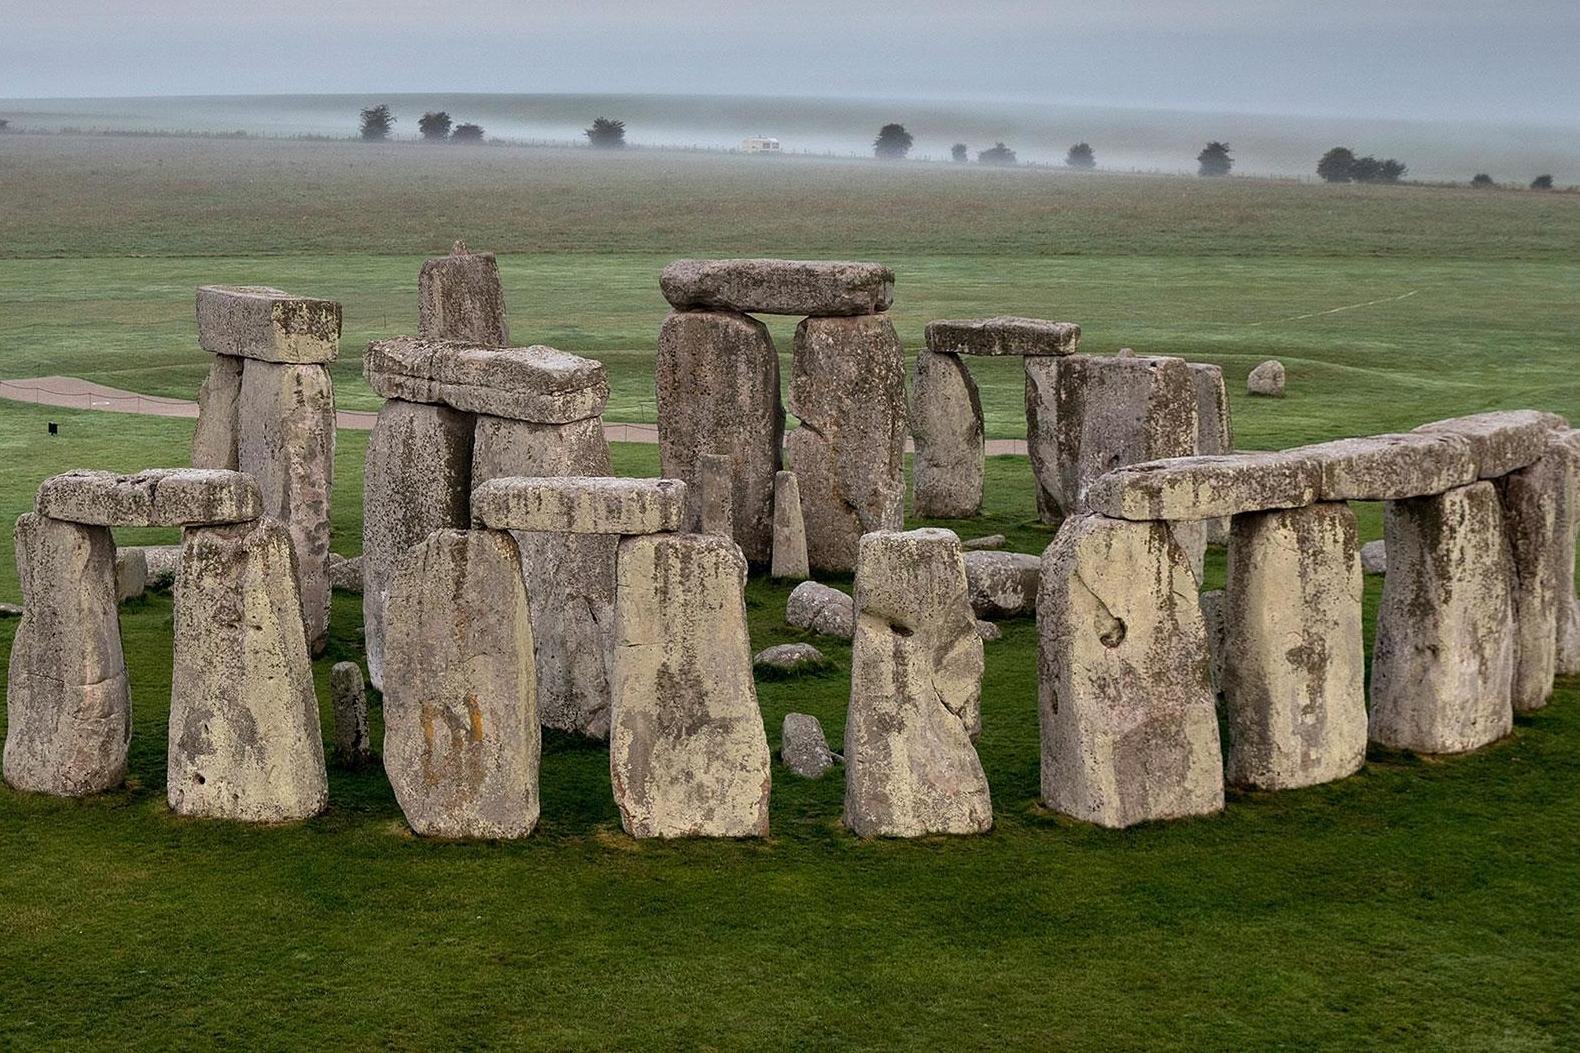 Rock-solid defence: how does Stonehenge square up against other ancient ceremonial locations worldwide?